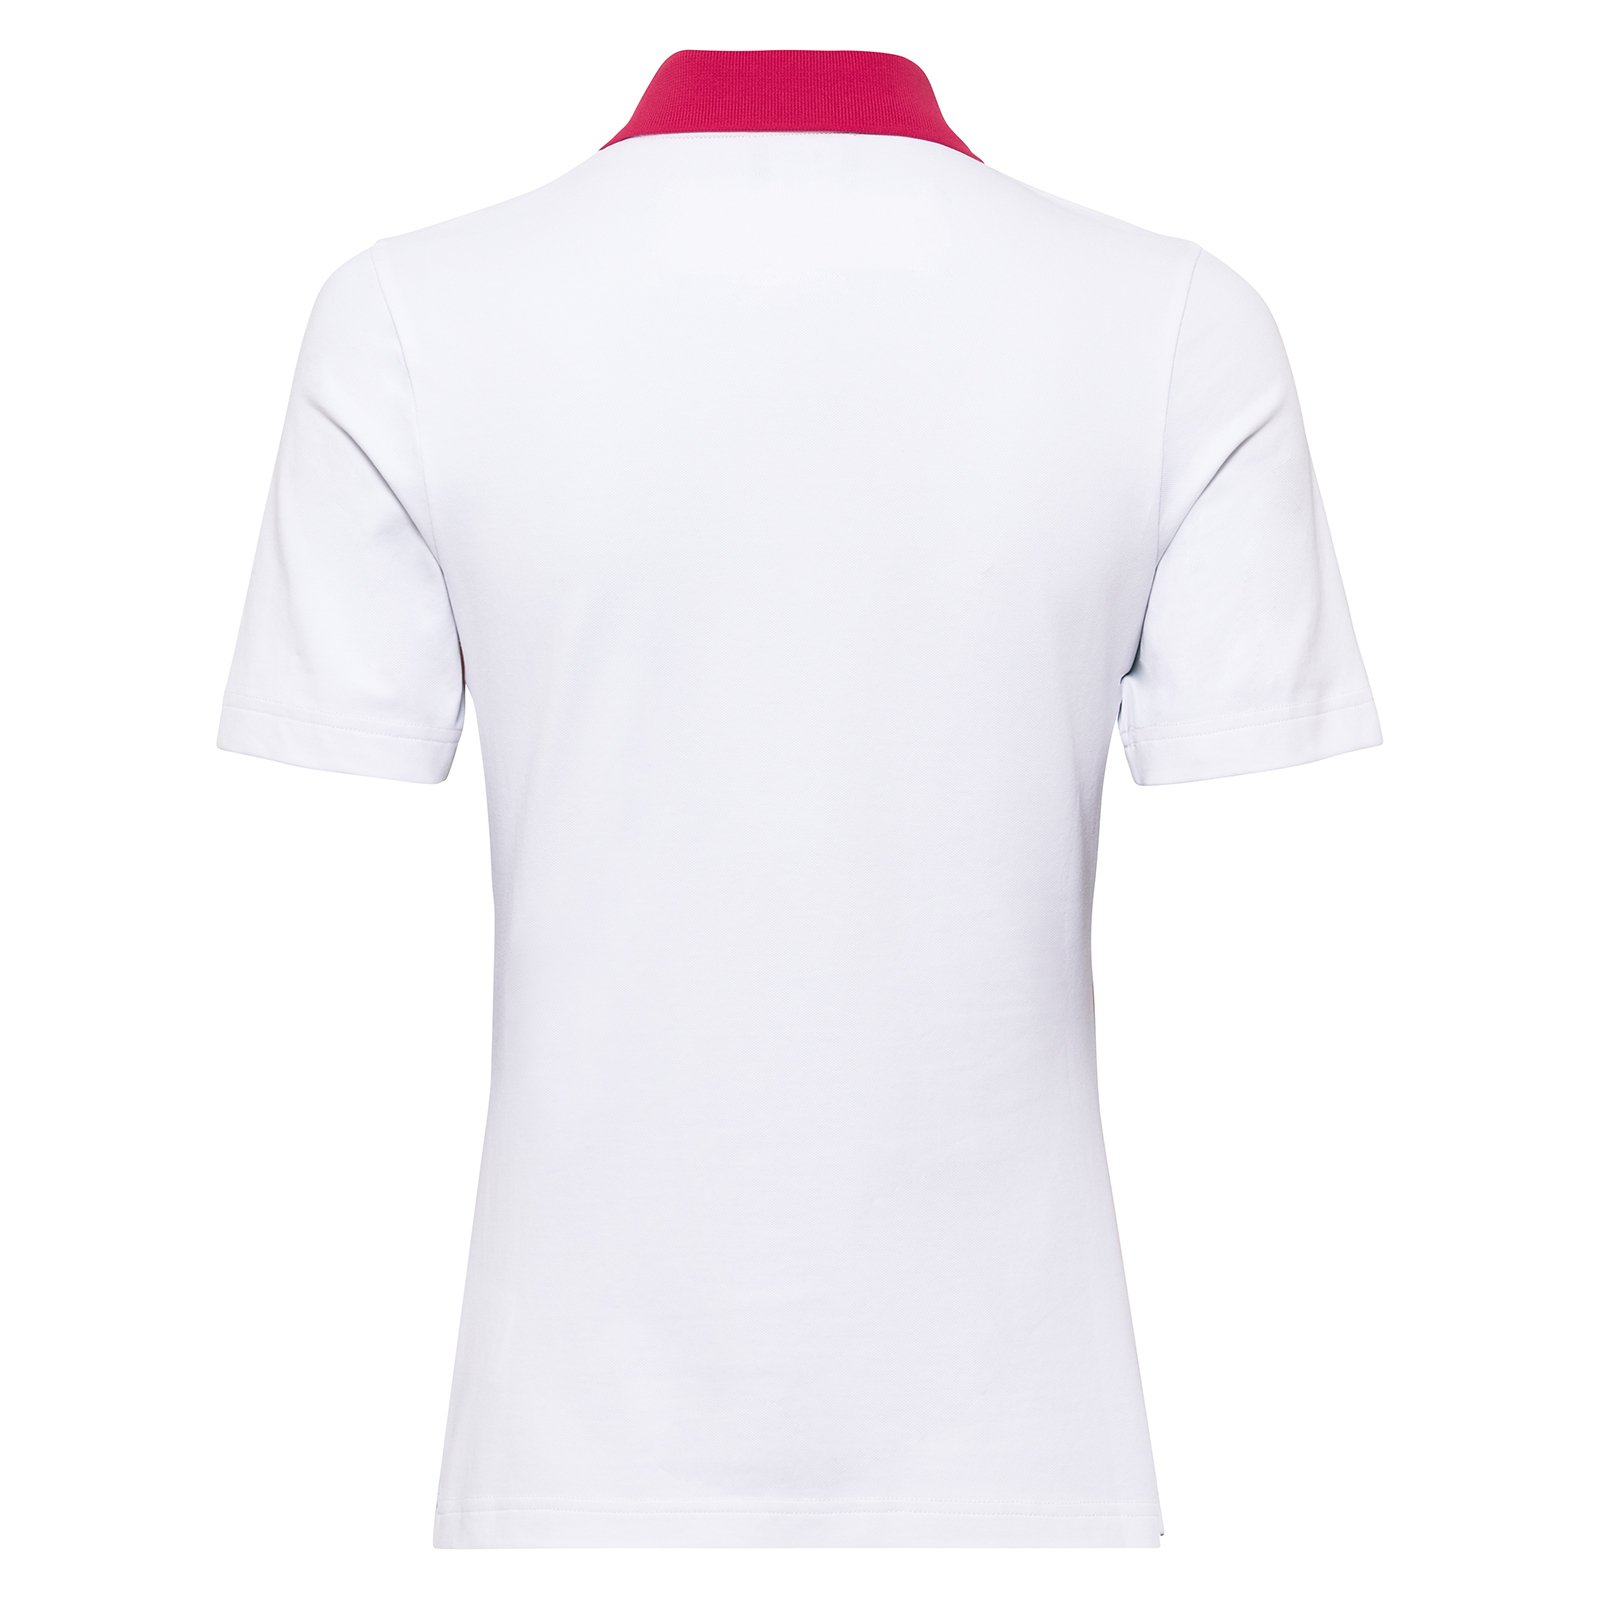 Ladies' golf polo shirt with ultraviolet protection